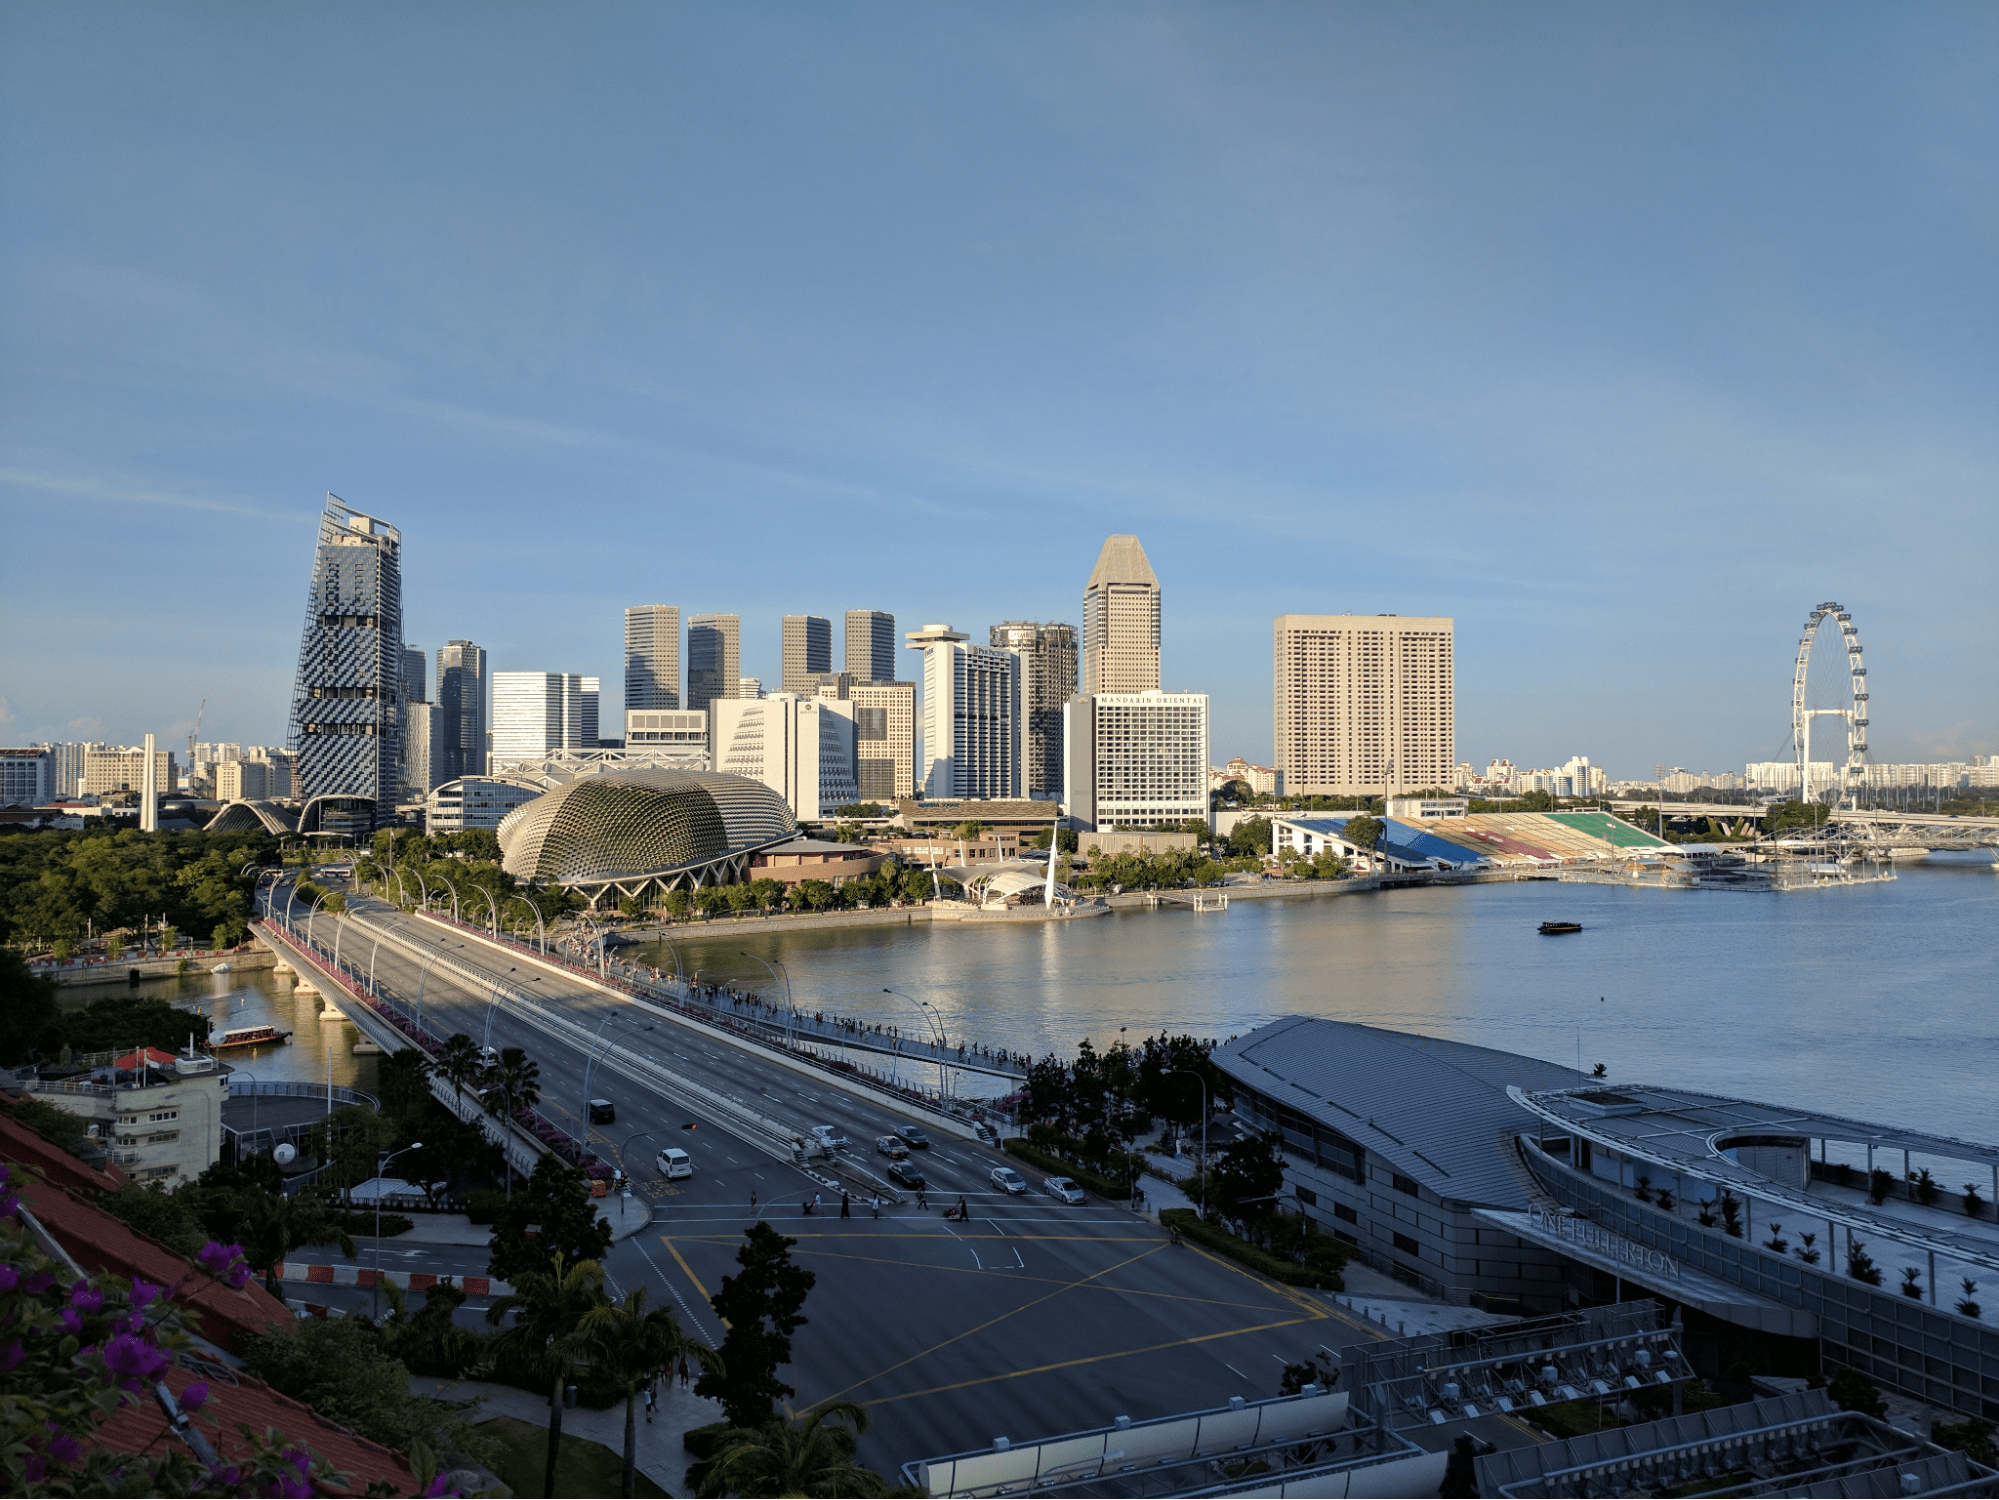 Singapore Hotels With Best F1 Views - fullerton hotel singapore